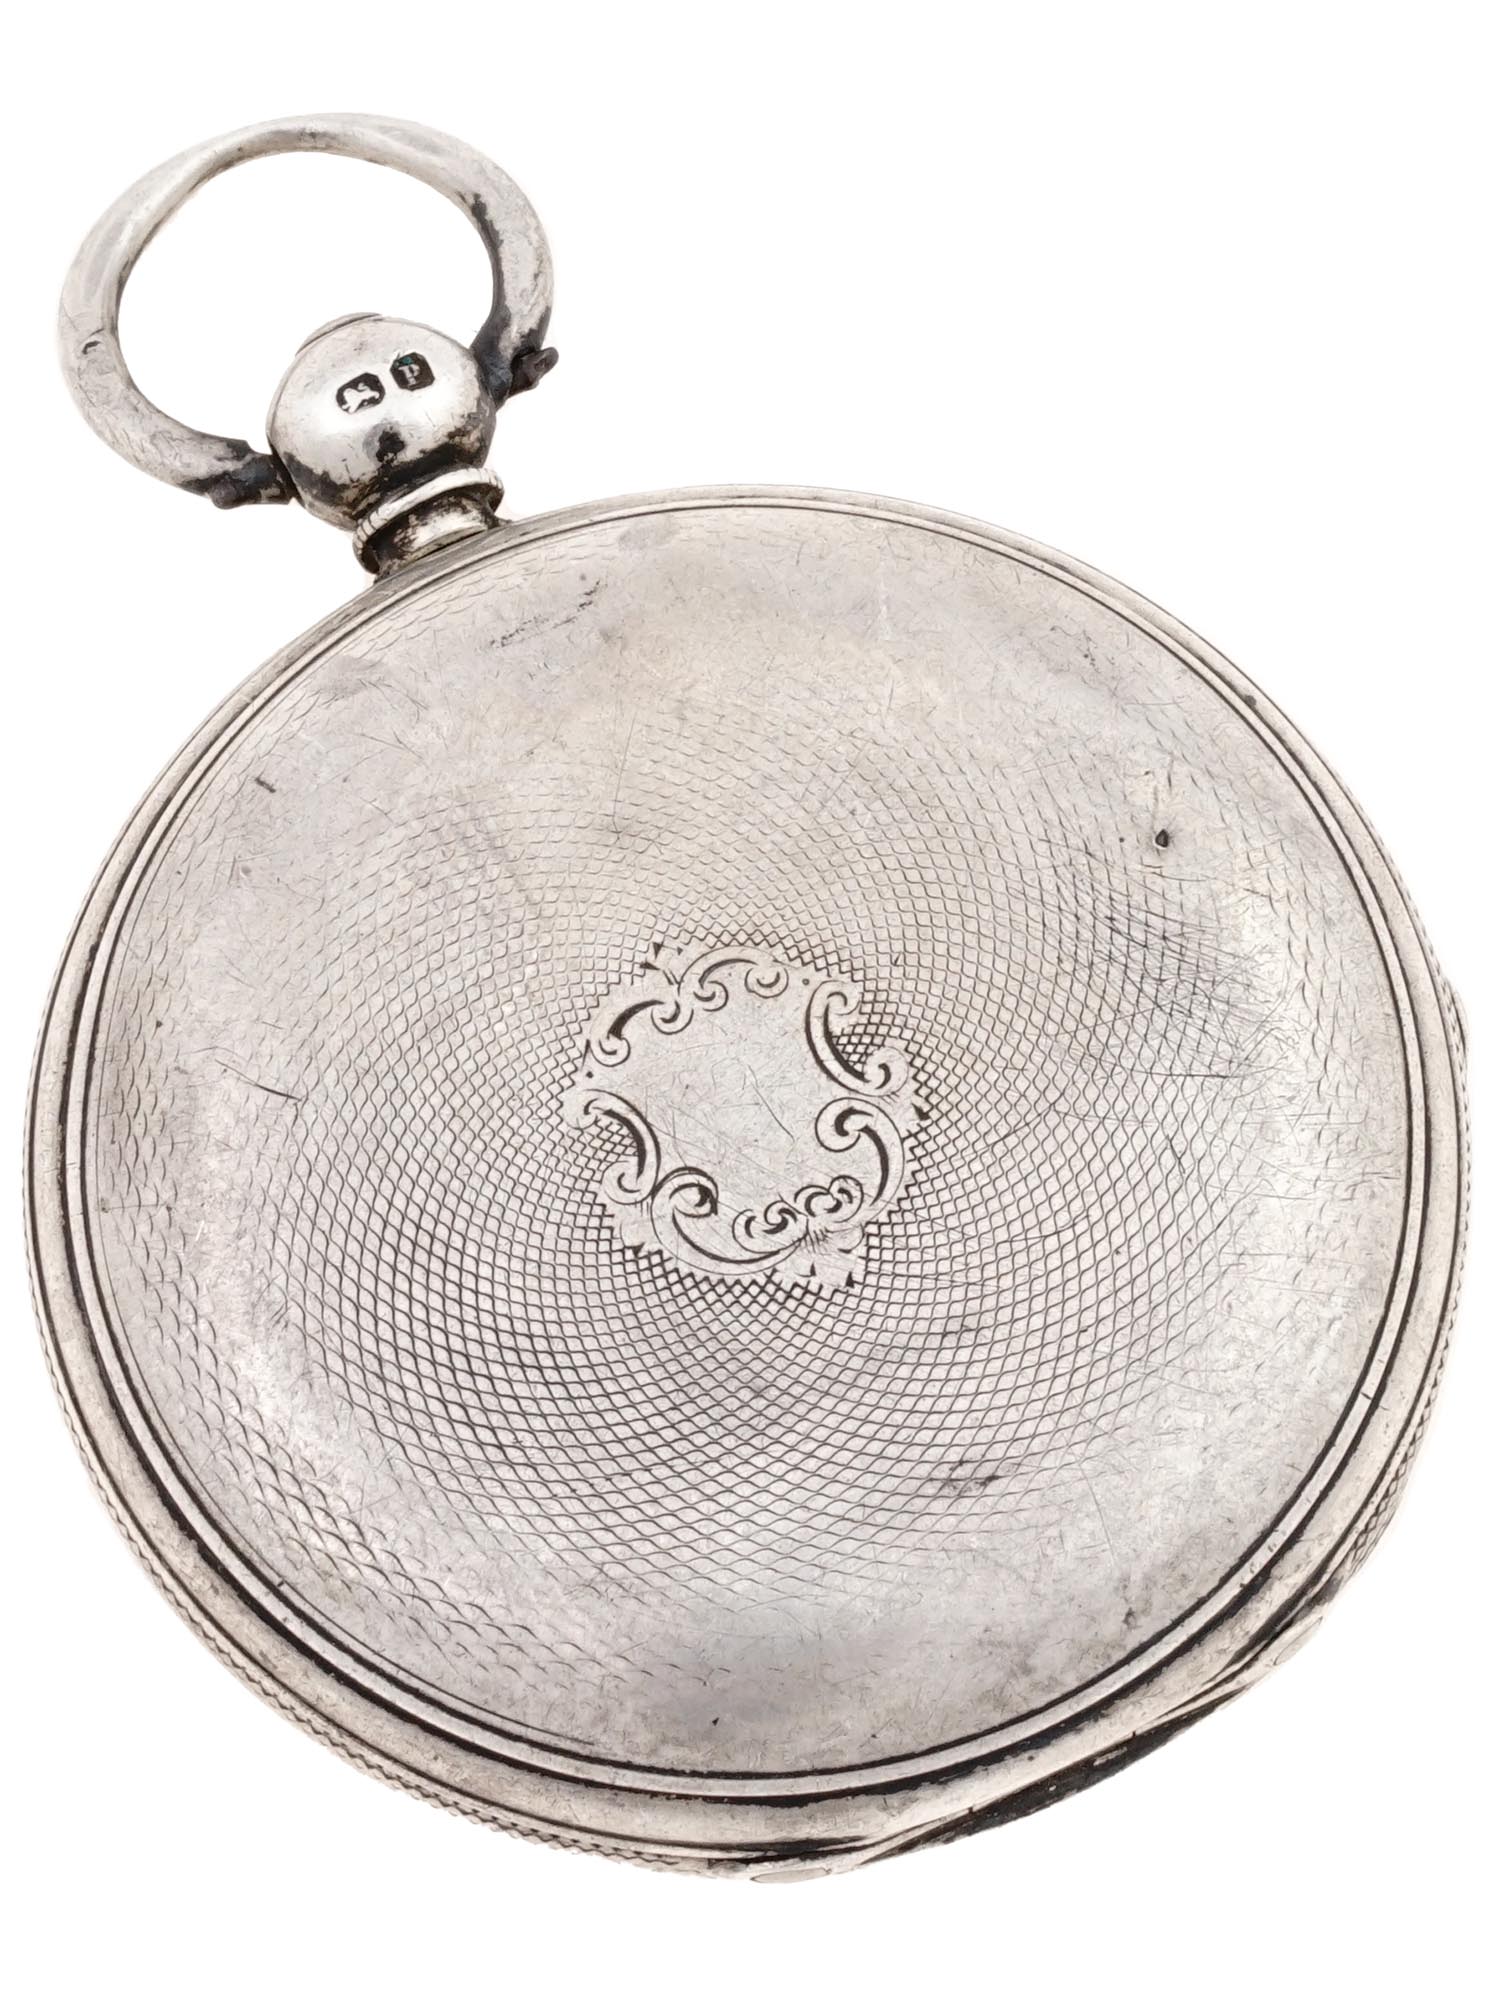 ANTIQUE ENGLISH SILVER POCKET WATCH PIC-2